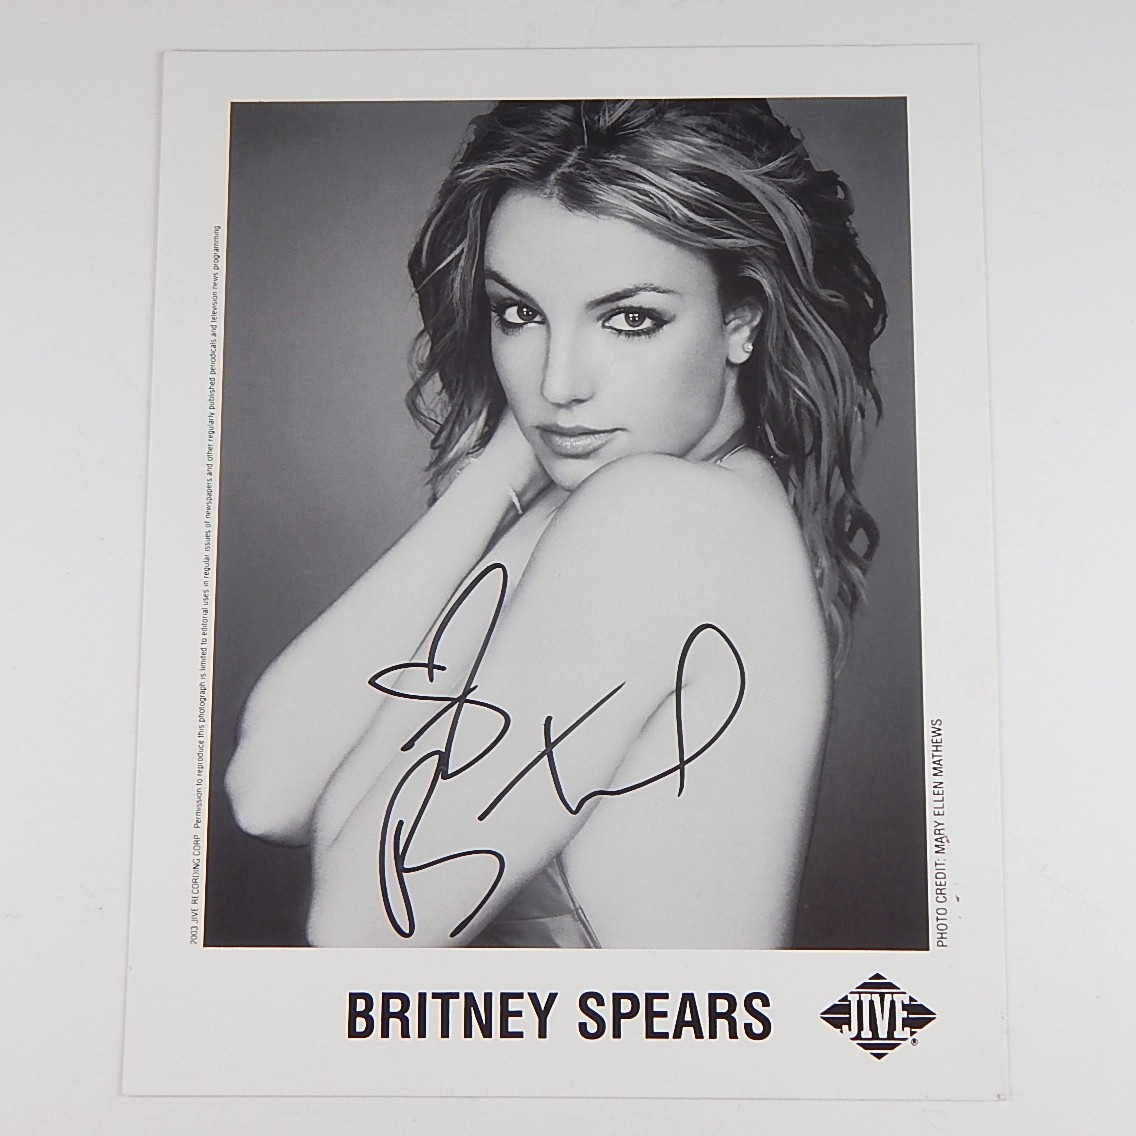 REPRINT BRITNEY SPEARS 10 autographed signed photo copy reprint 